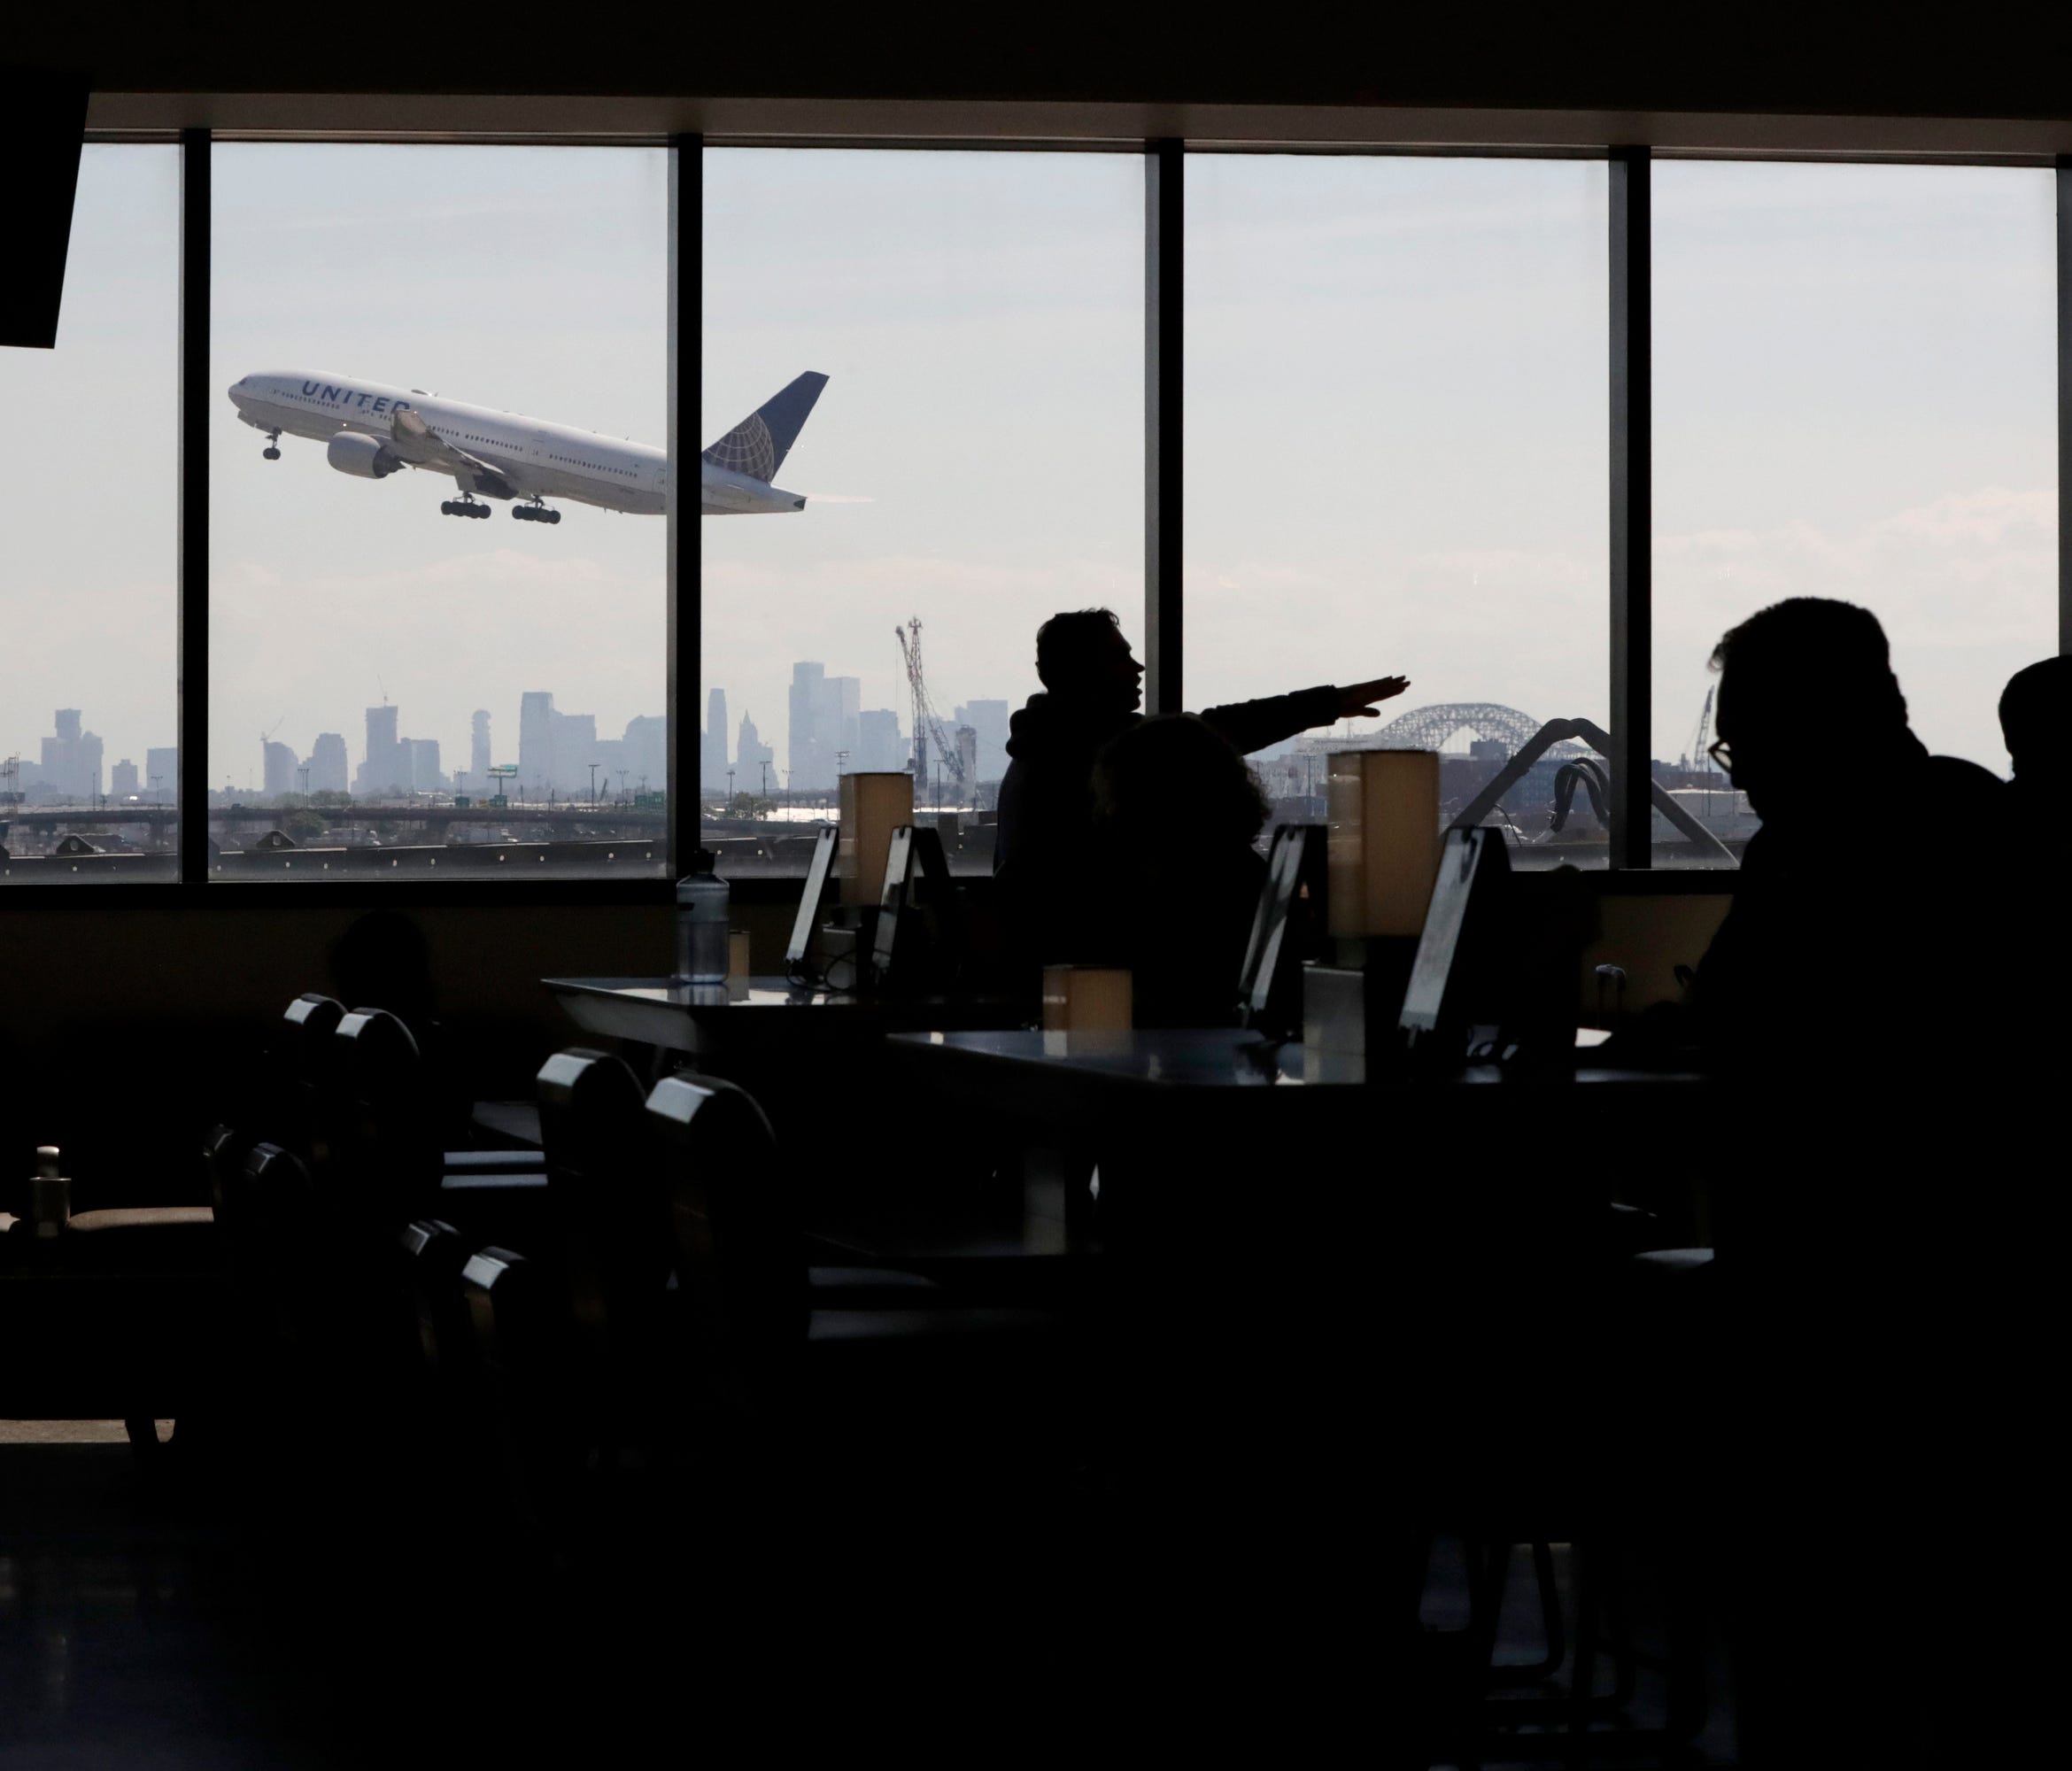 A United Airlines commercial jet takes off as travelers sit at a gate in Terminal C of Newark Liberty International Airport on July 18, 2018, in Newark, N.J.